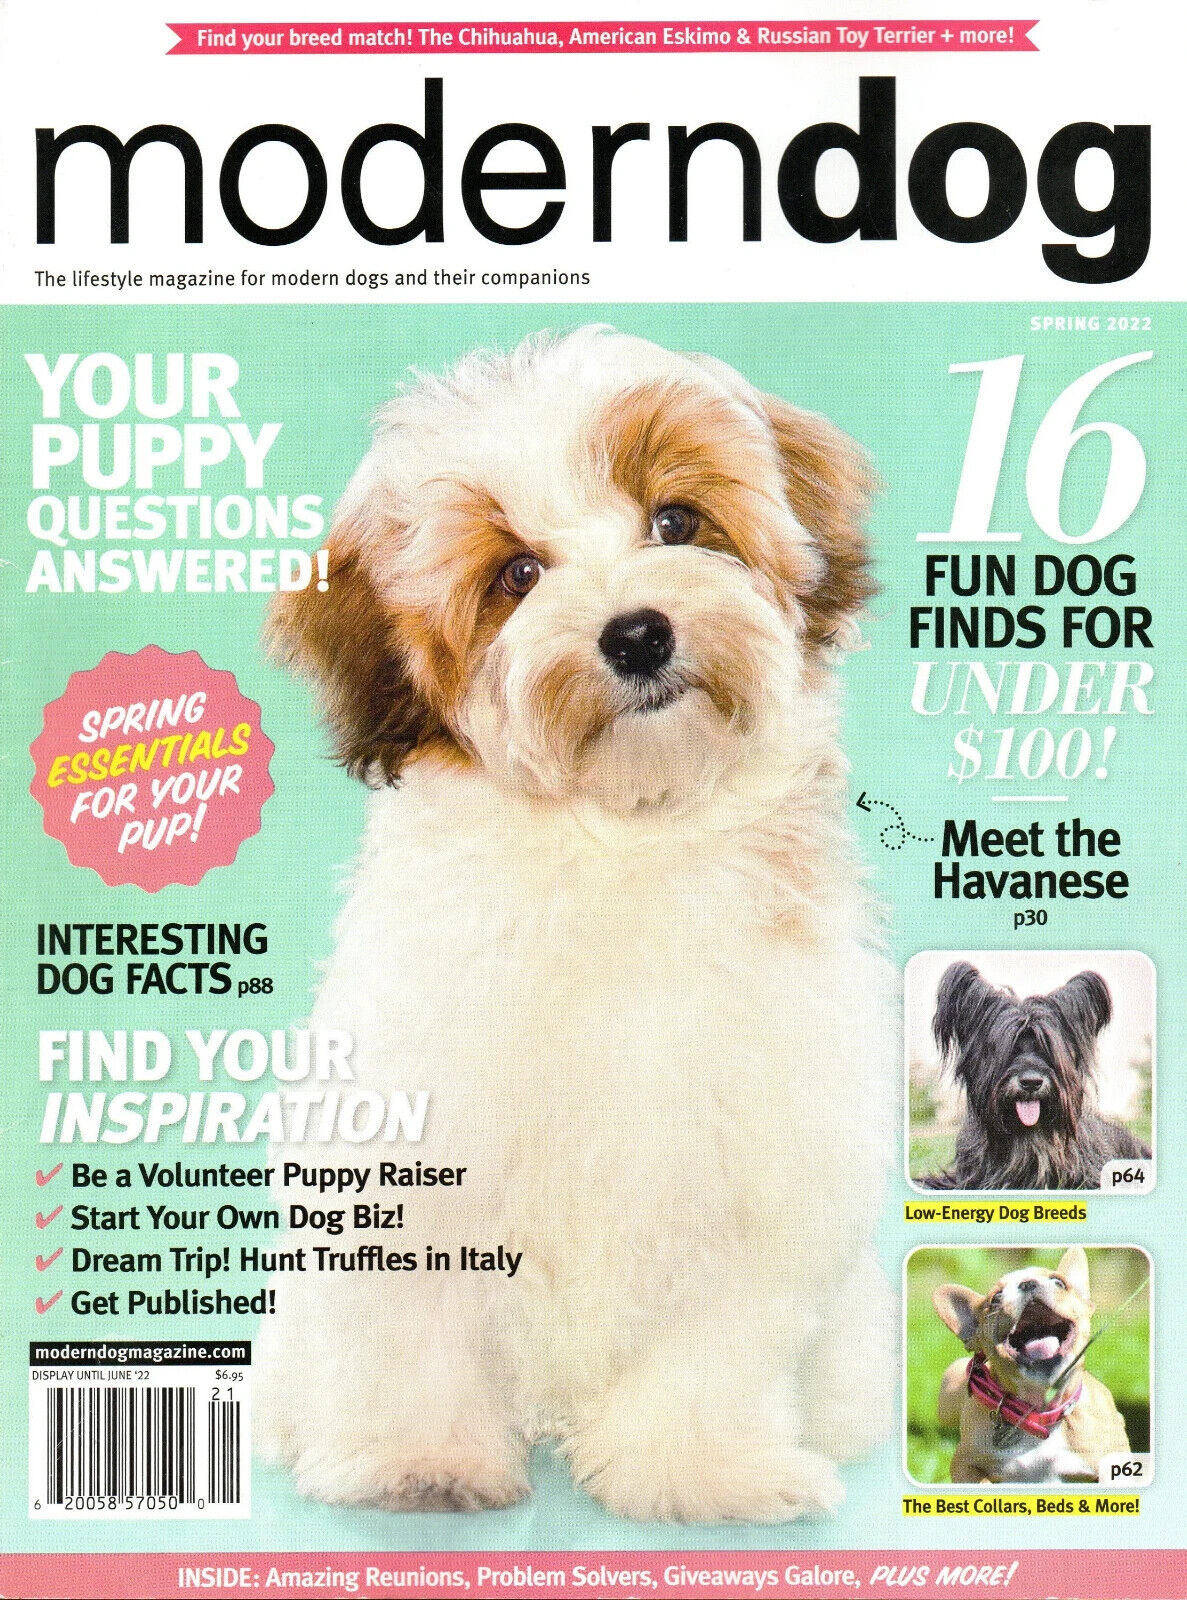 Modern Dog Magazine uses SimpleCirc for their subscriber management software